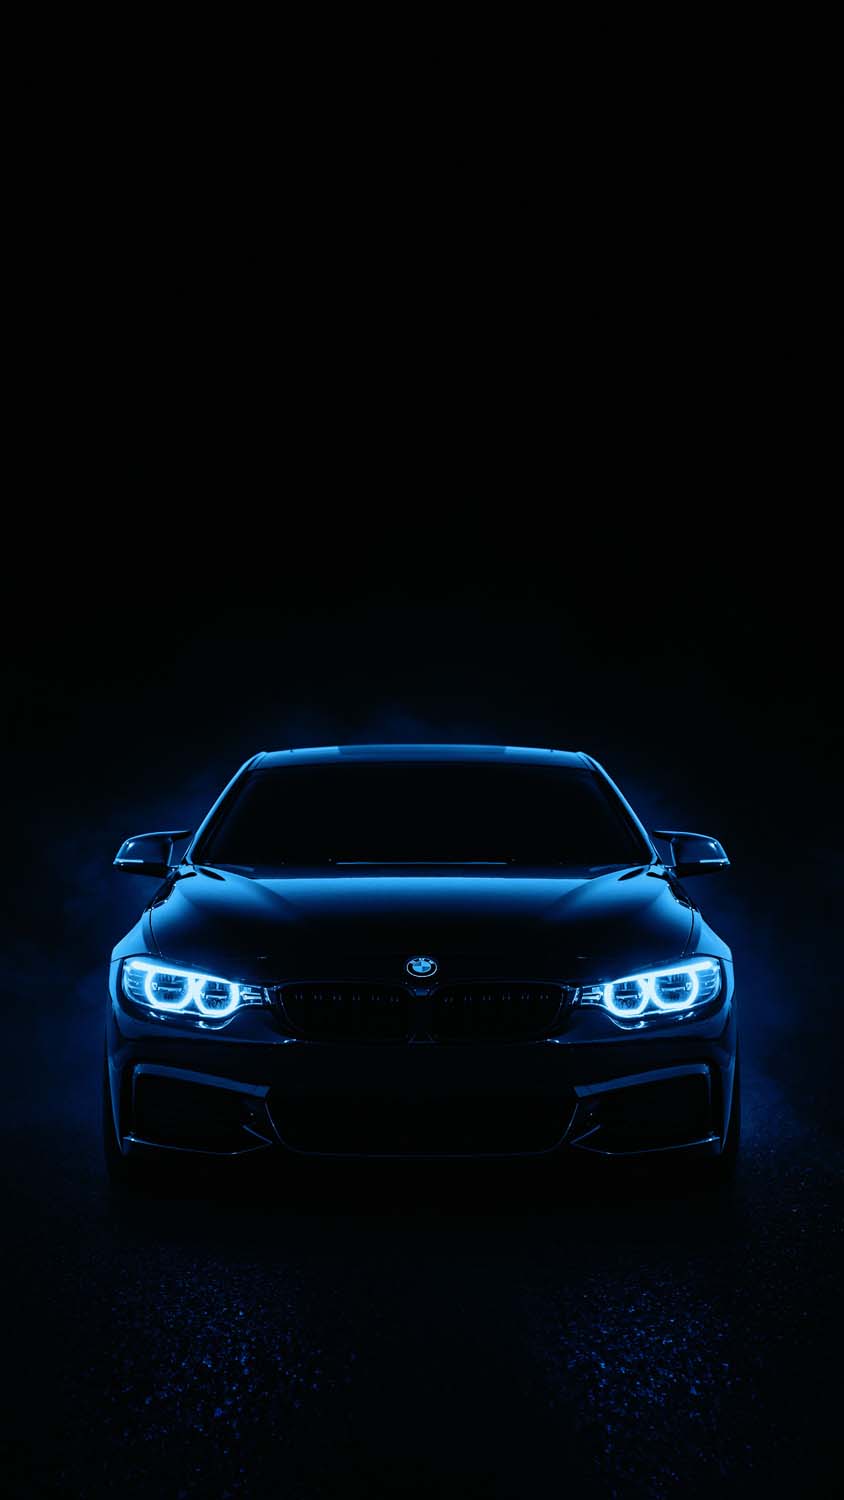 BMW Car Glow IPhone Wallpaper HD - IPhone Wallpapers : iPhone Wallpapers